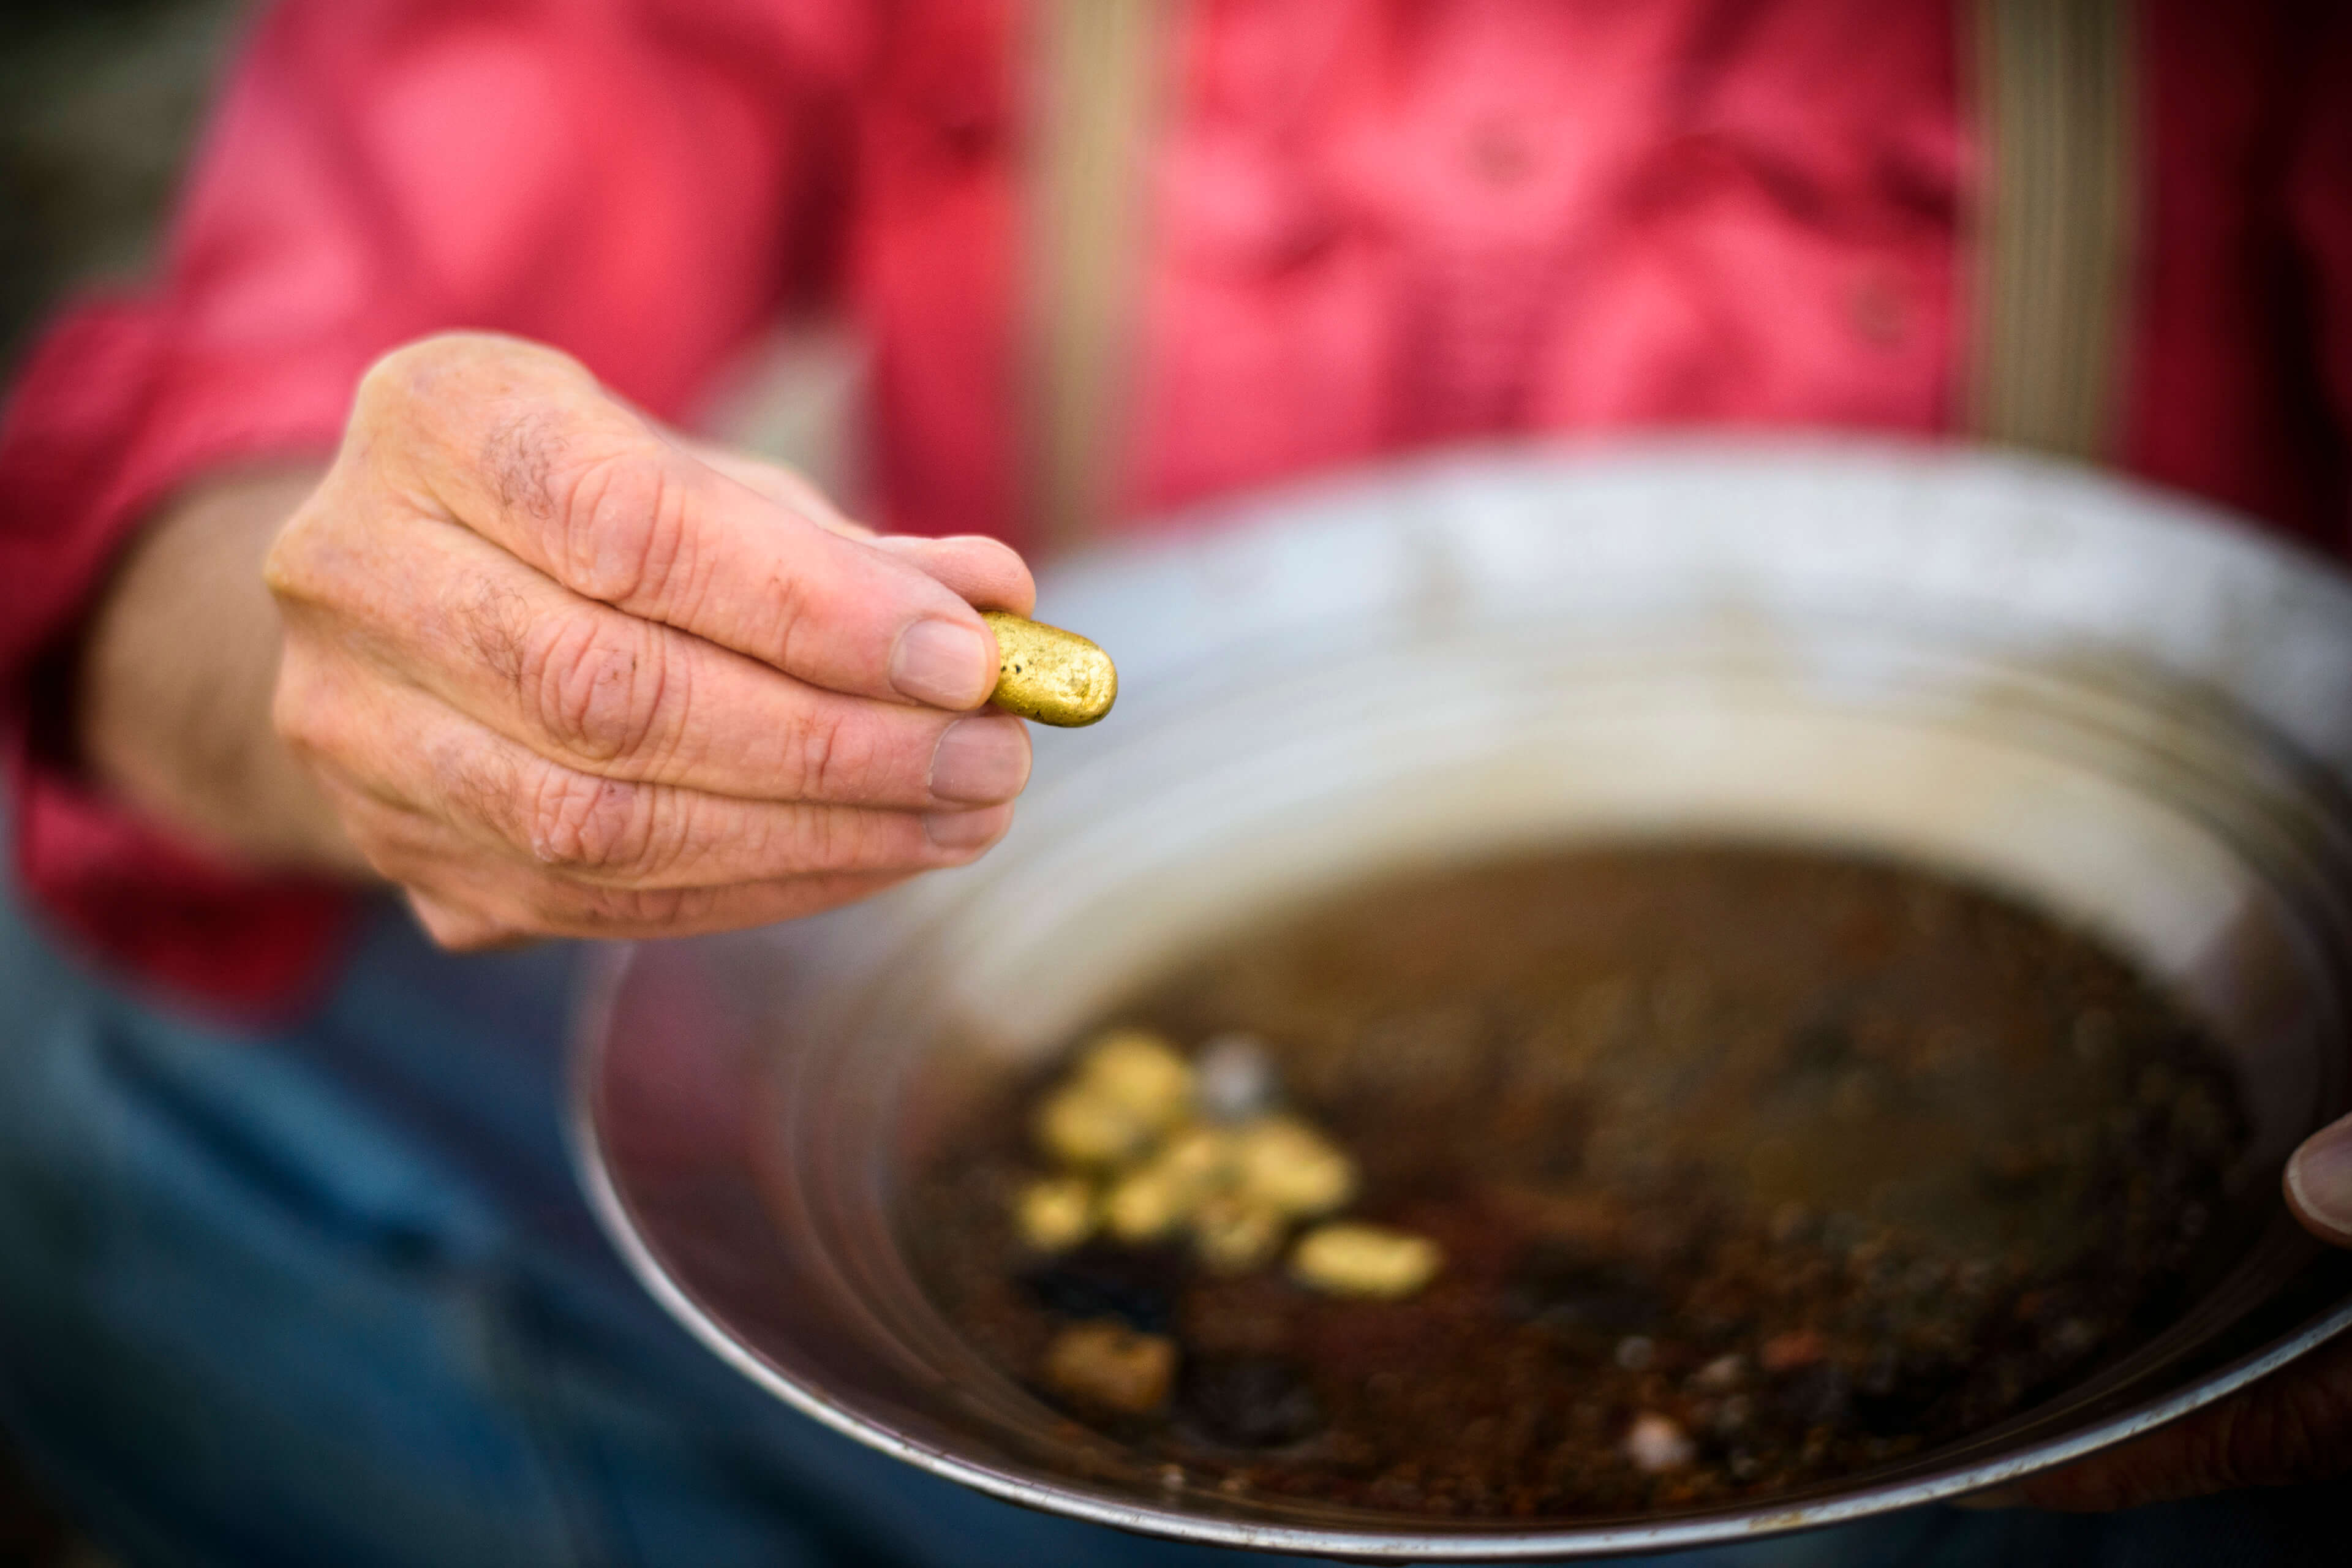 Finding treasure amongst rubbish – a hand holds a gold nugget from a sifting pan